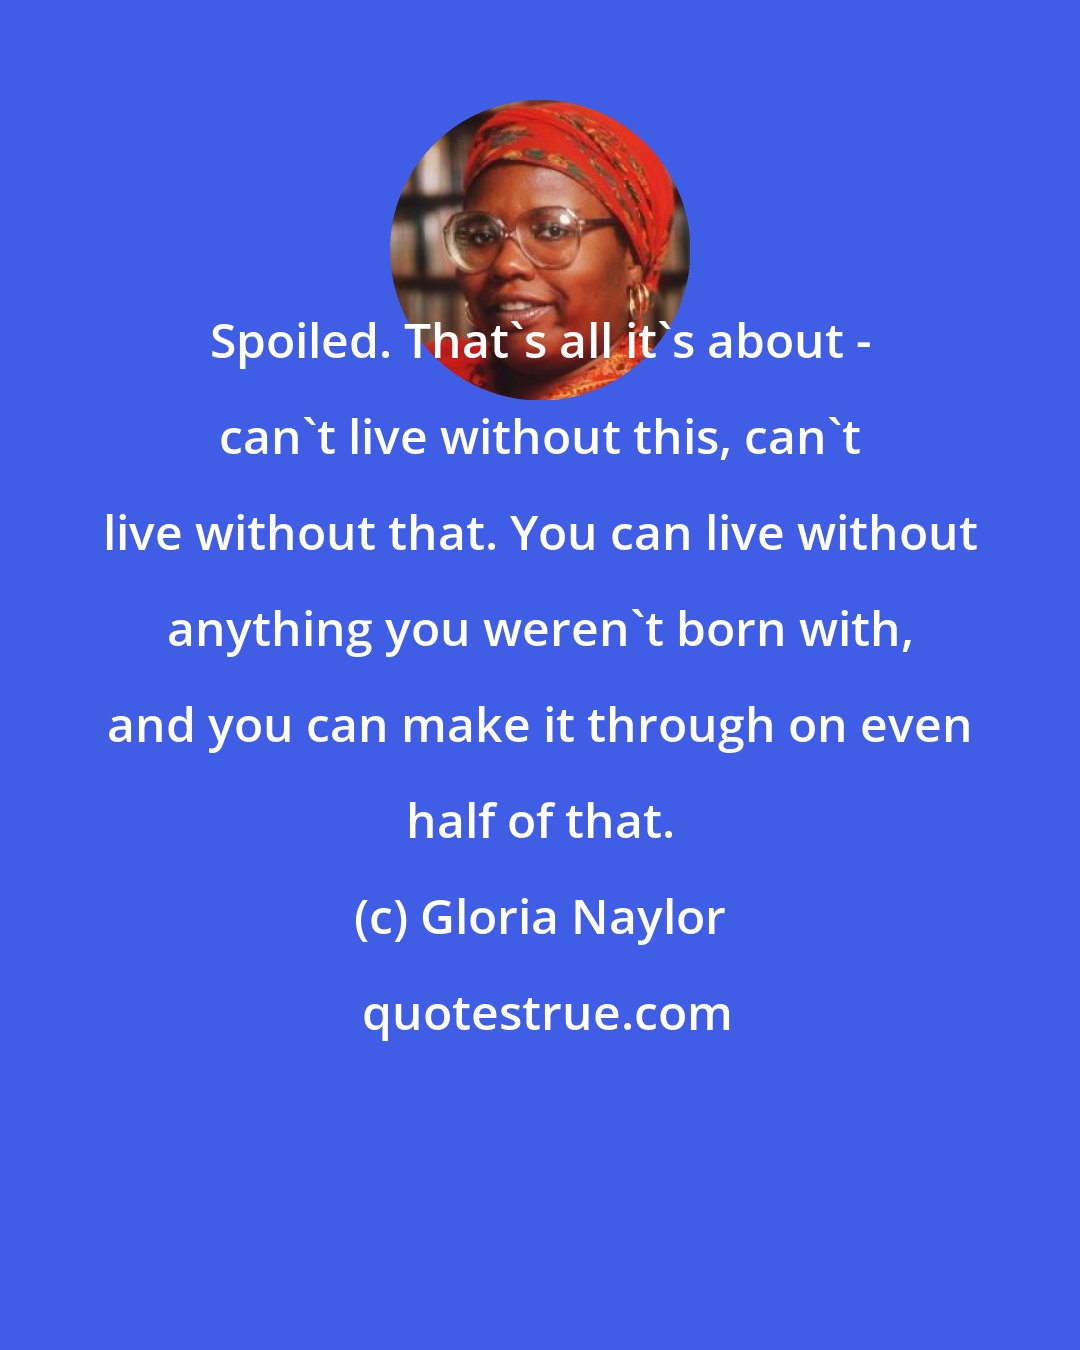 Gloria Naylor: Spoiled. That's all it's about - can't live without this, can't live without that. You can live without anything you weren't born with, and you can make it through on even half of that.